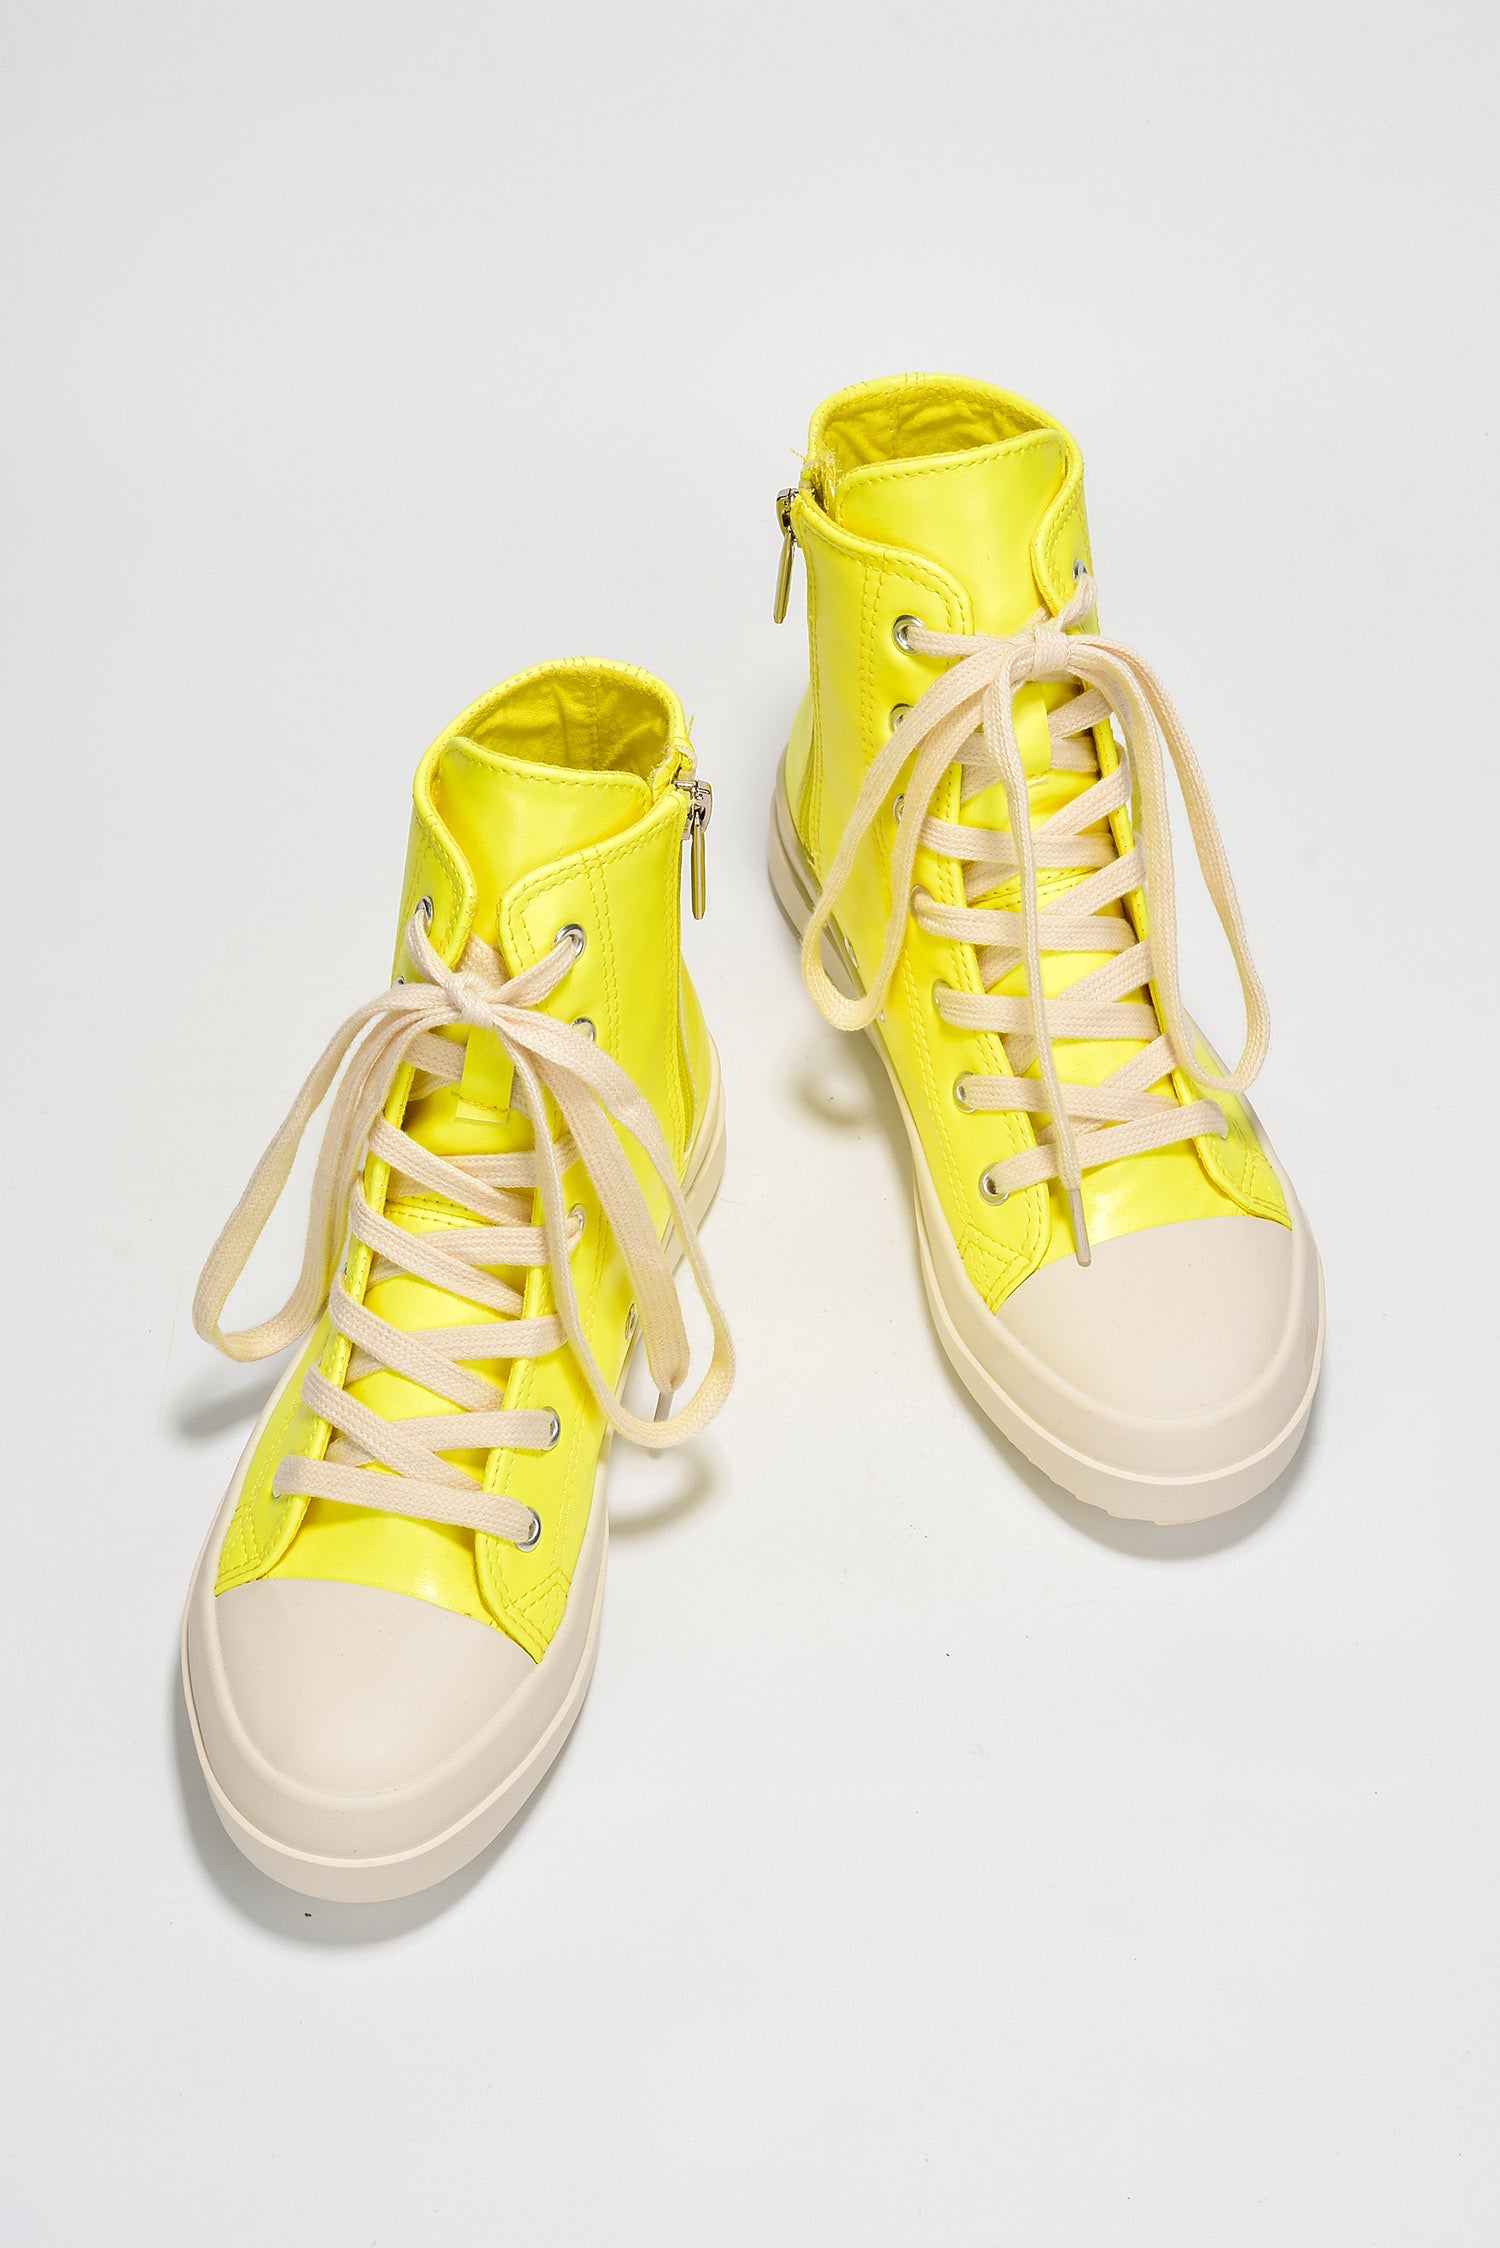 UrbanOG - Mania Lace Up High Top Lug Sole Sneakers - SNEAKERS